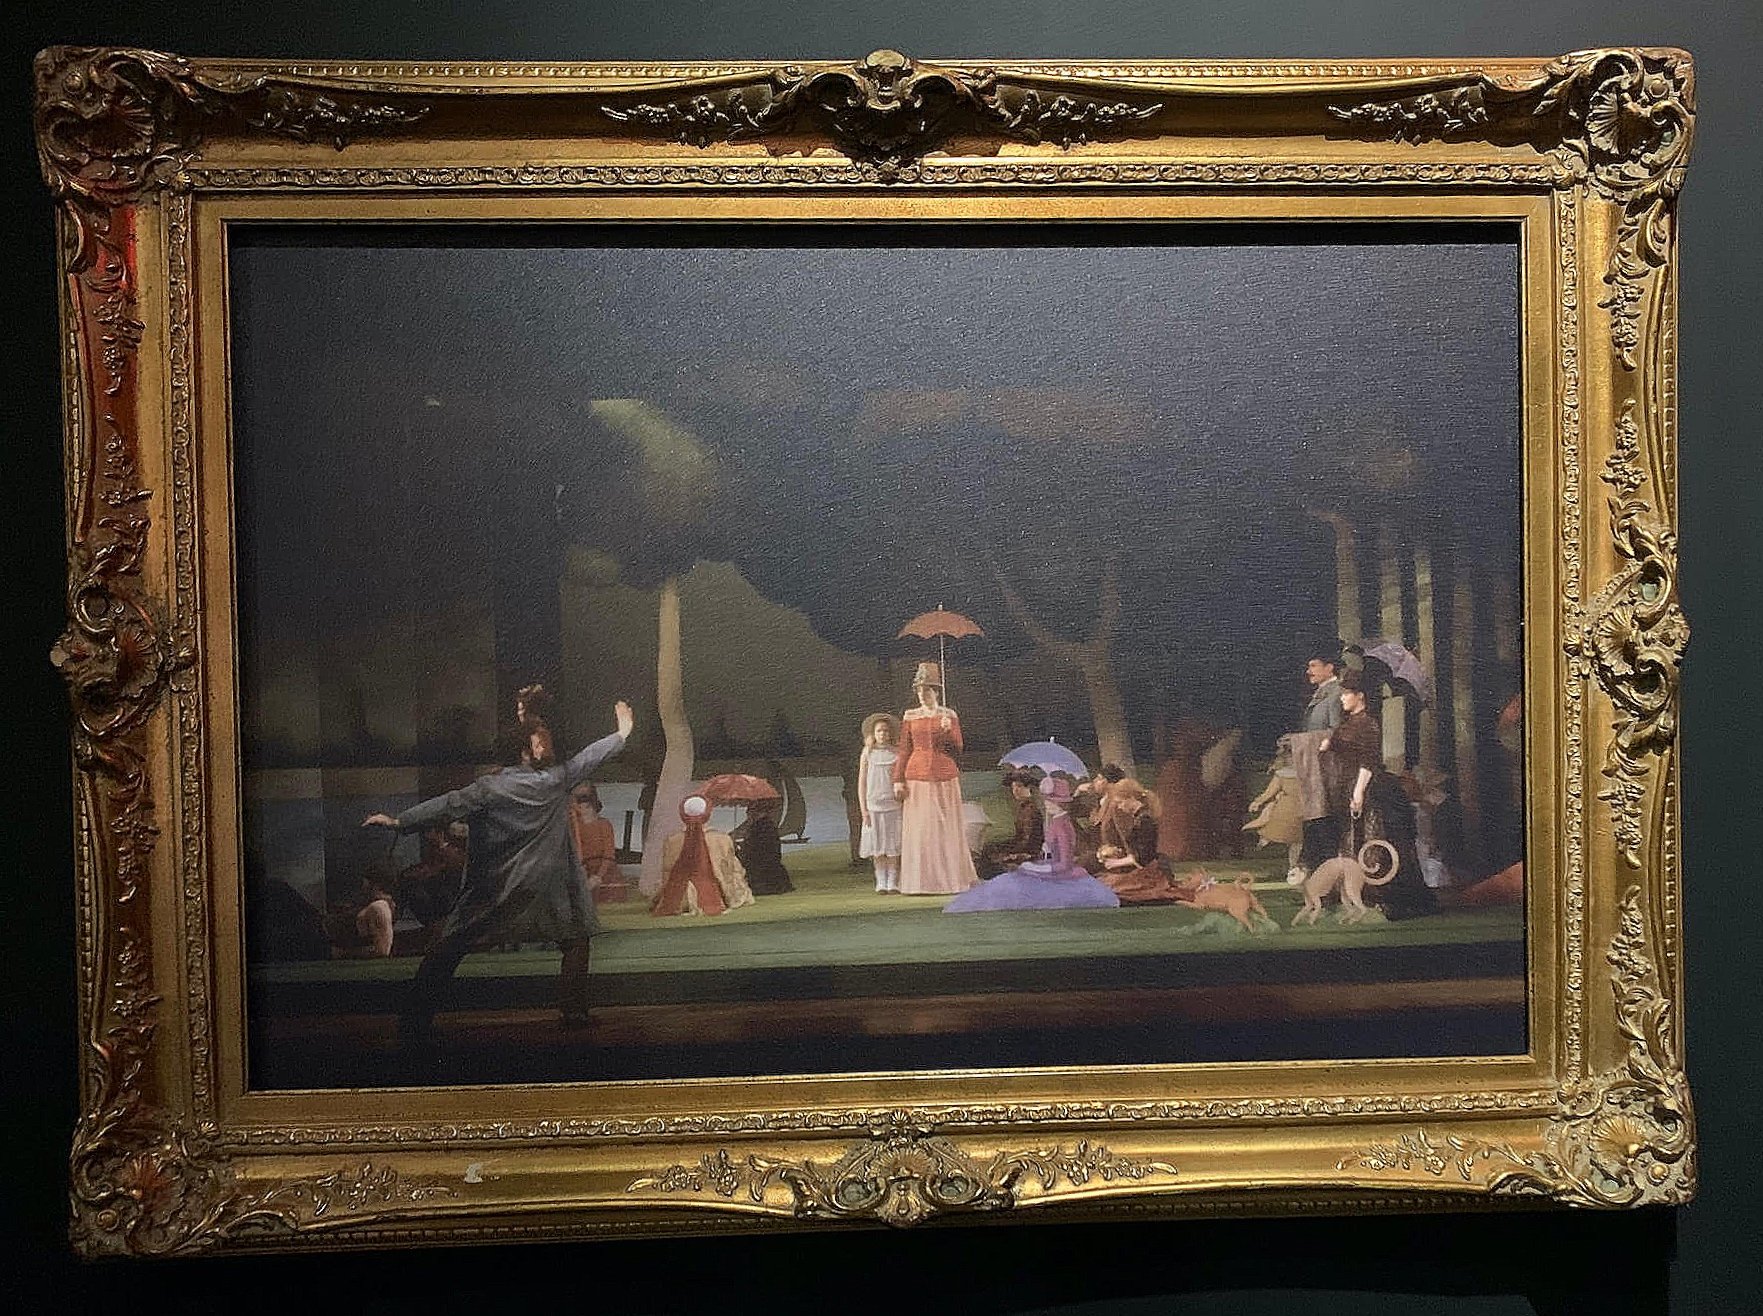  One of the paintings that inspired Sondheim’s Sunday in the Park with George 